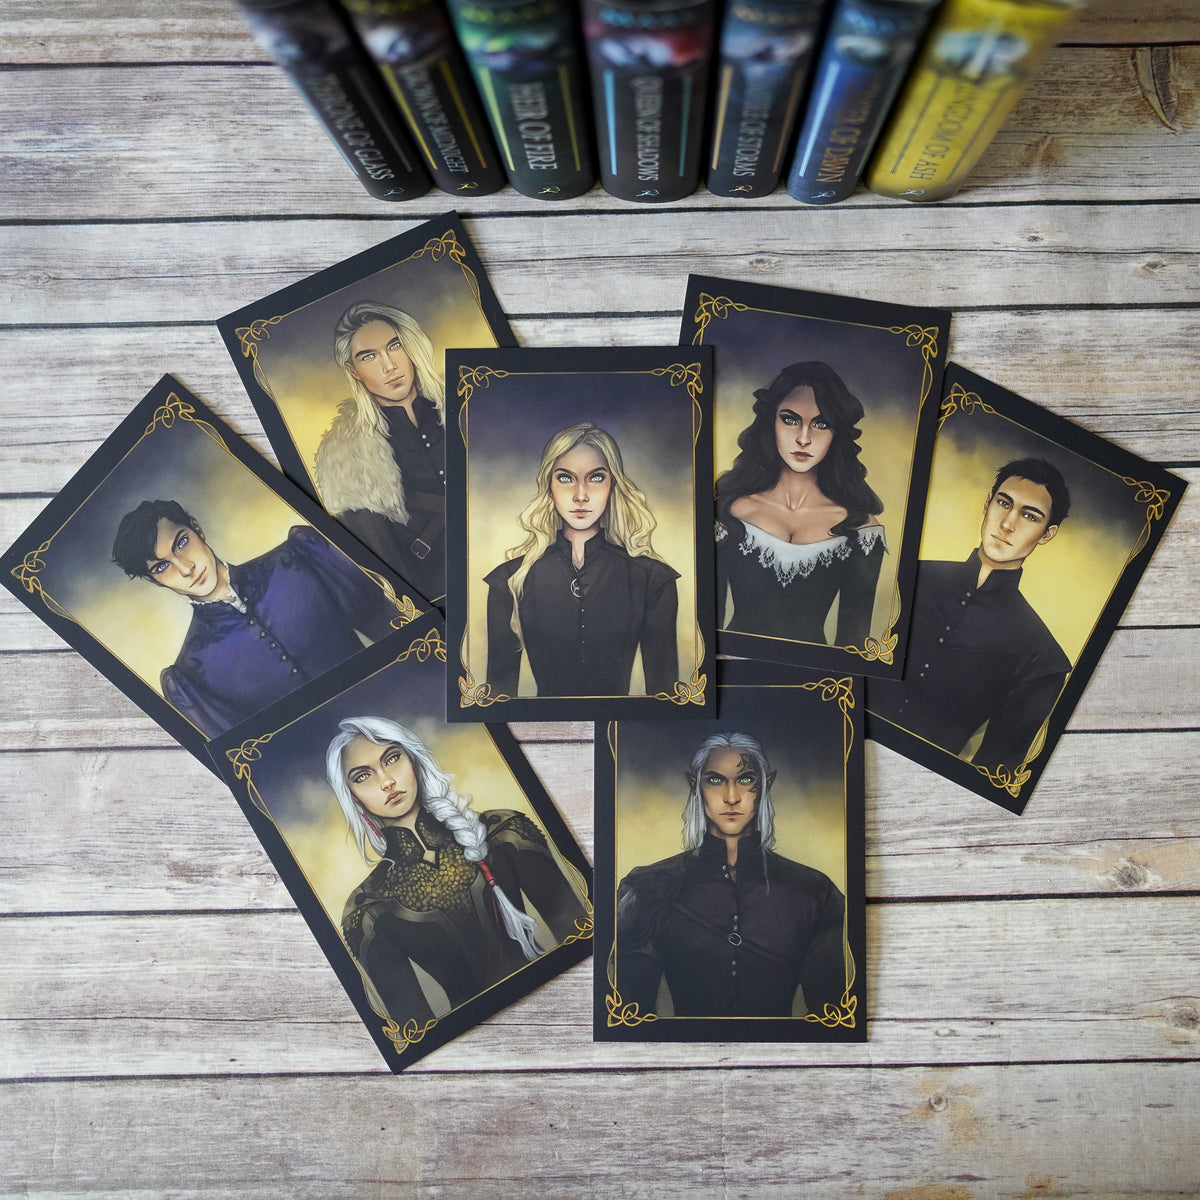 Throne of Glass Art Print set of 7 cards featuring black and gold borders and depicting images of Celaena, Rowan, Dorian, Aedion, Chaol, Manon, and Lysandra